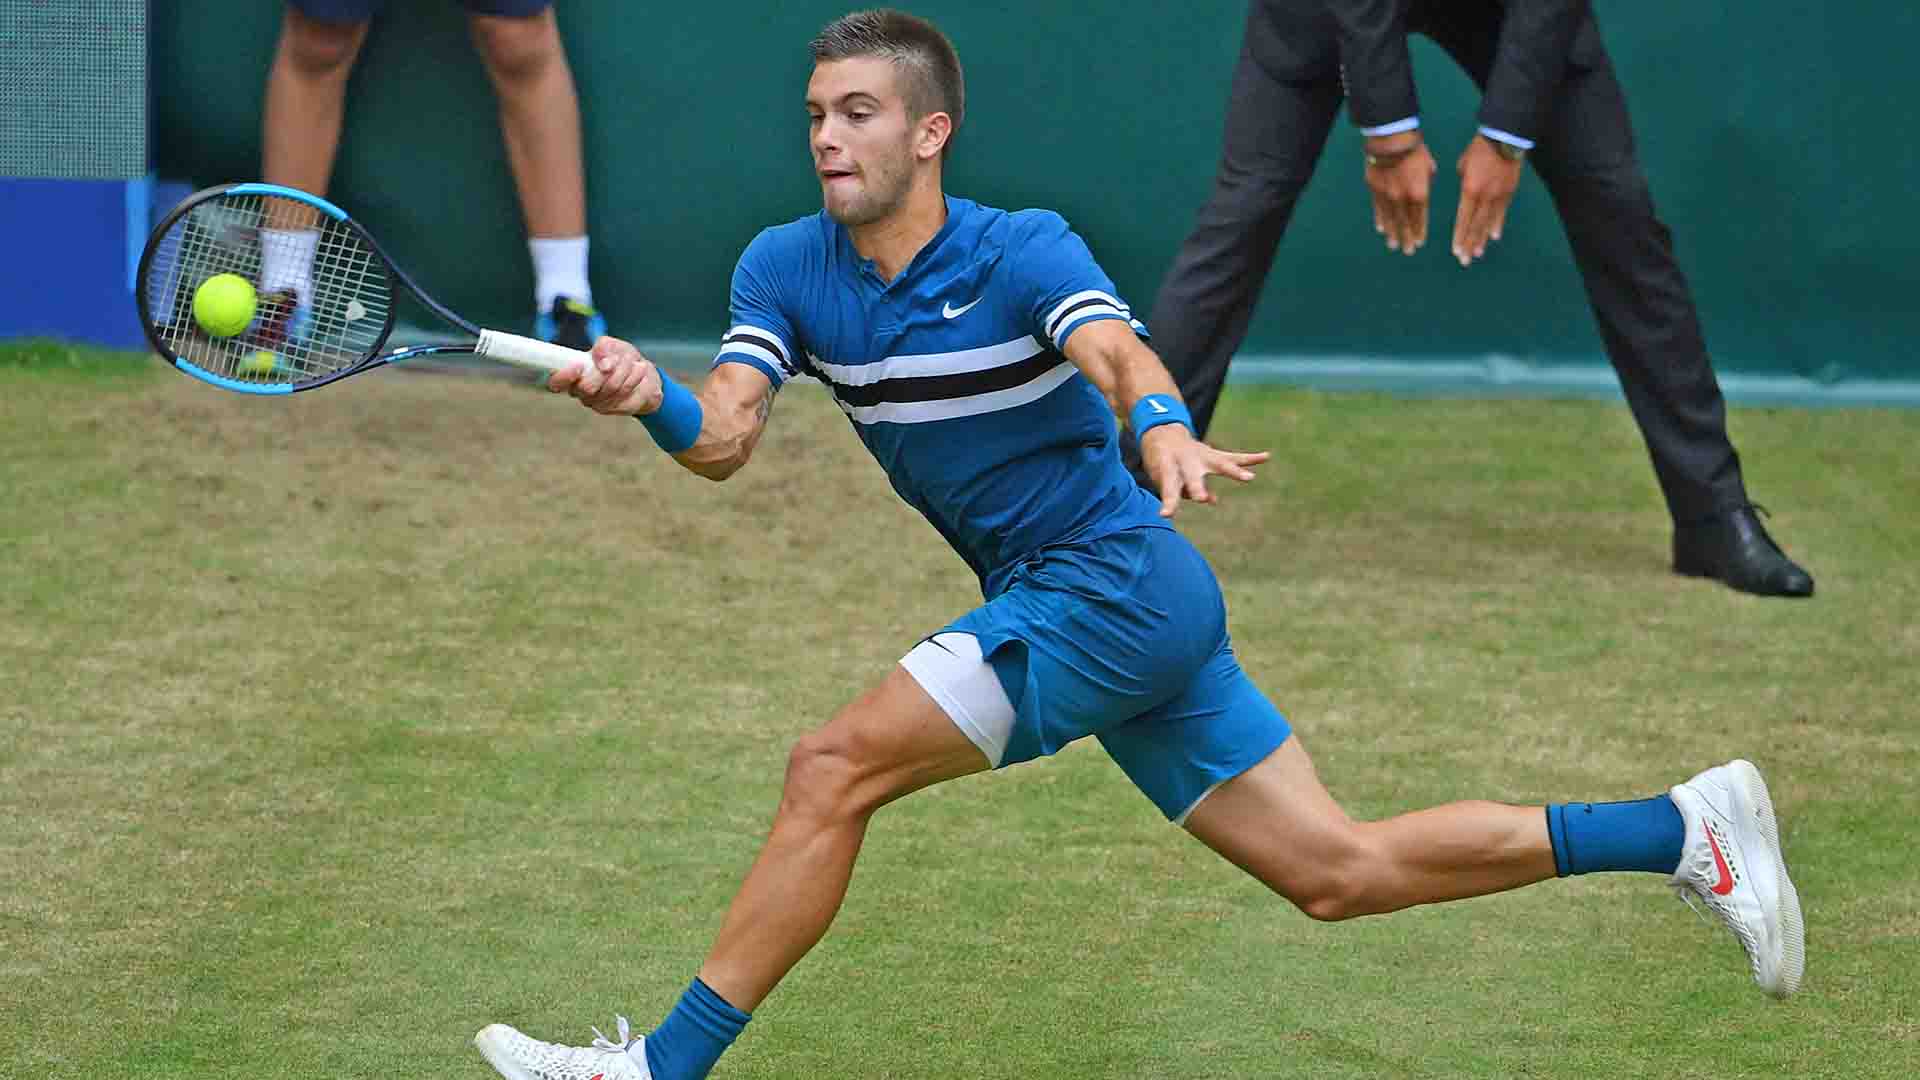 Borna Coric, who entered the week 2-7 in tour-level matches on grass, upsets Roger Federer to triumph in Halle.